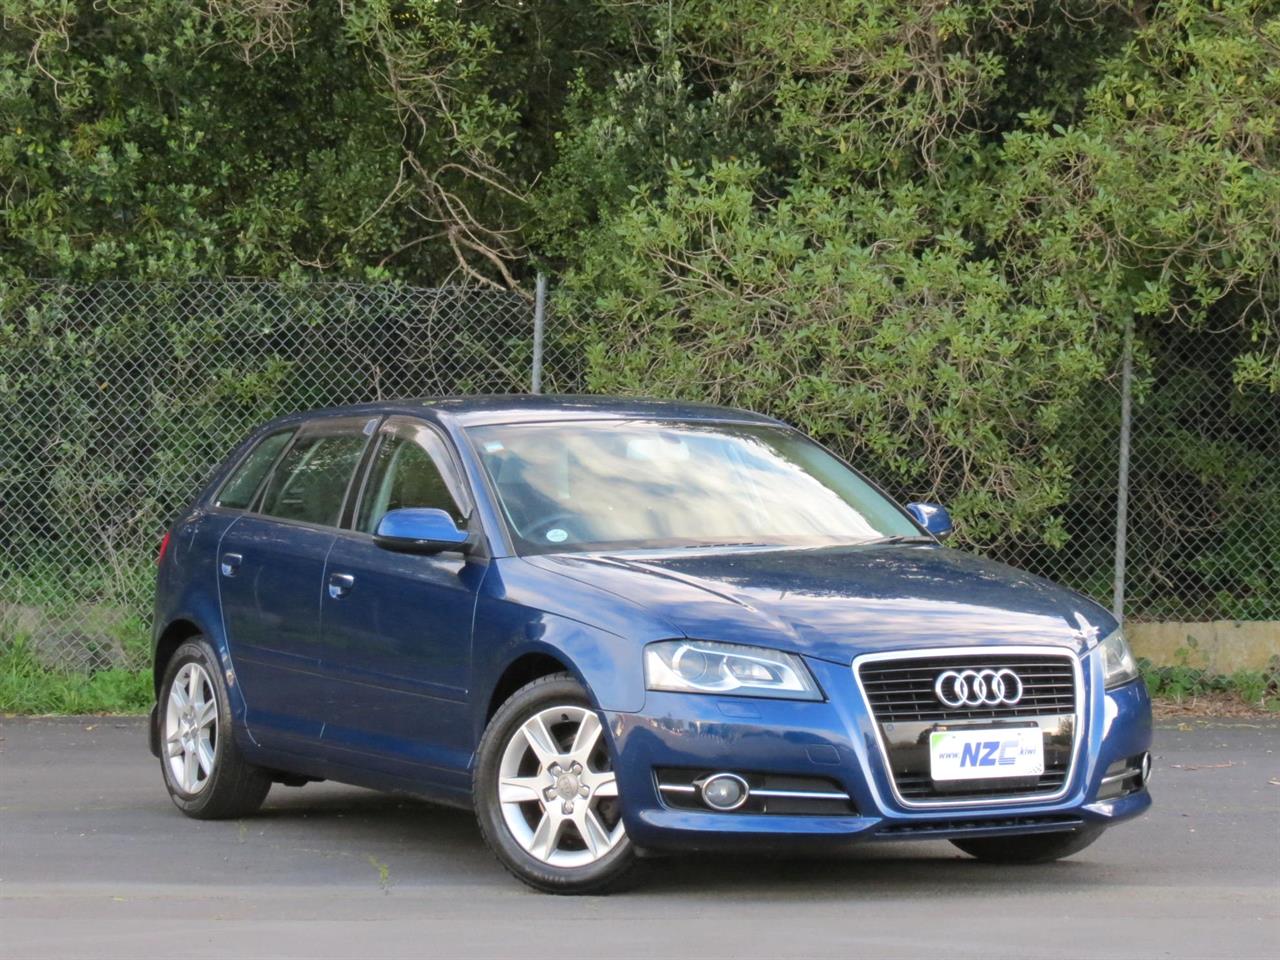 NZC 2012 Audi A3 just arrived to Auckland